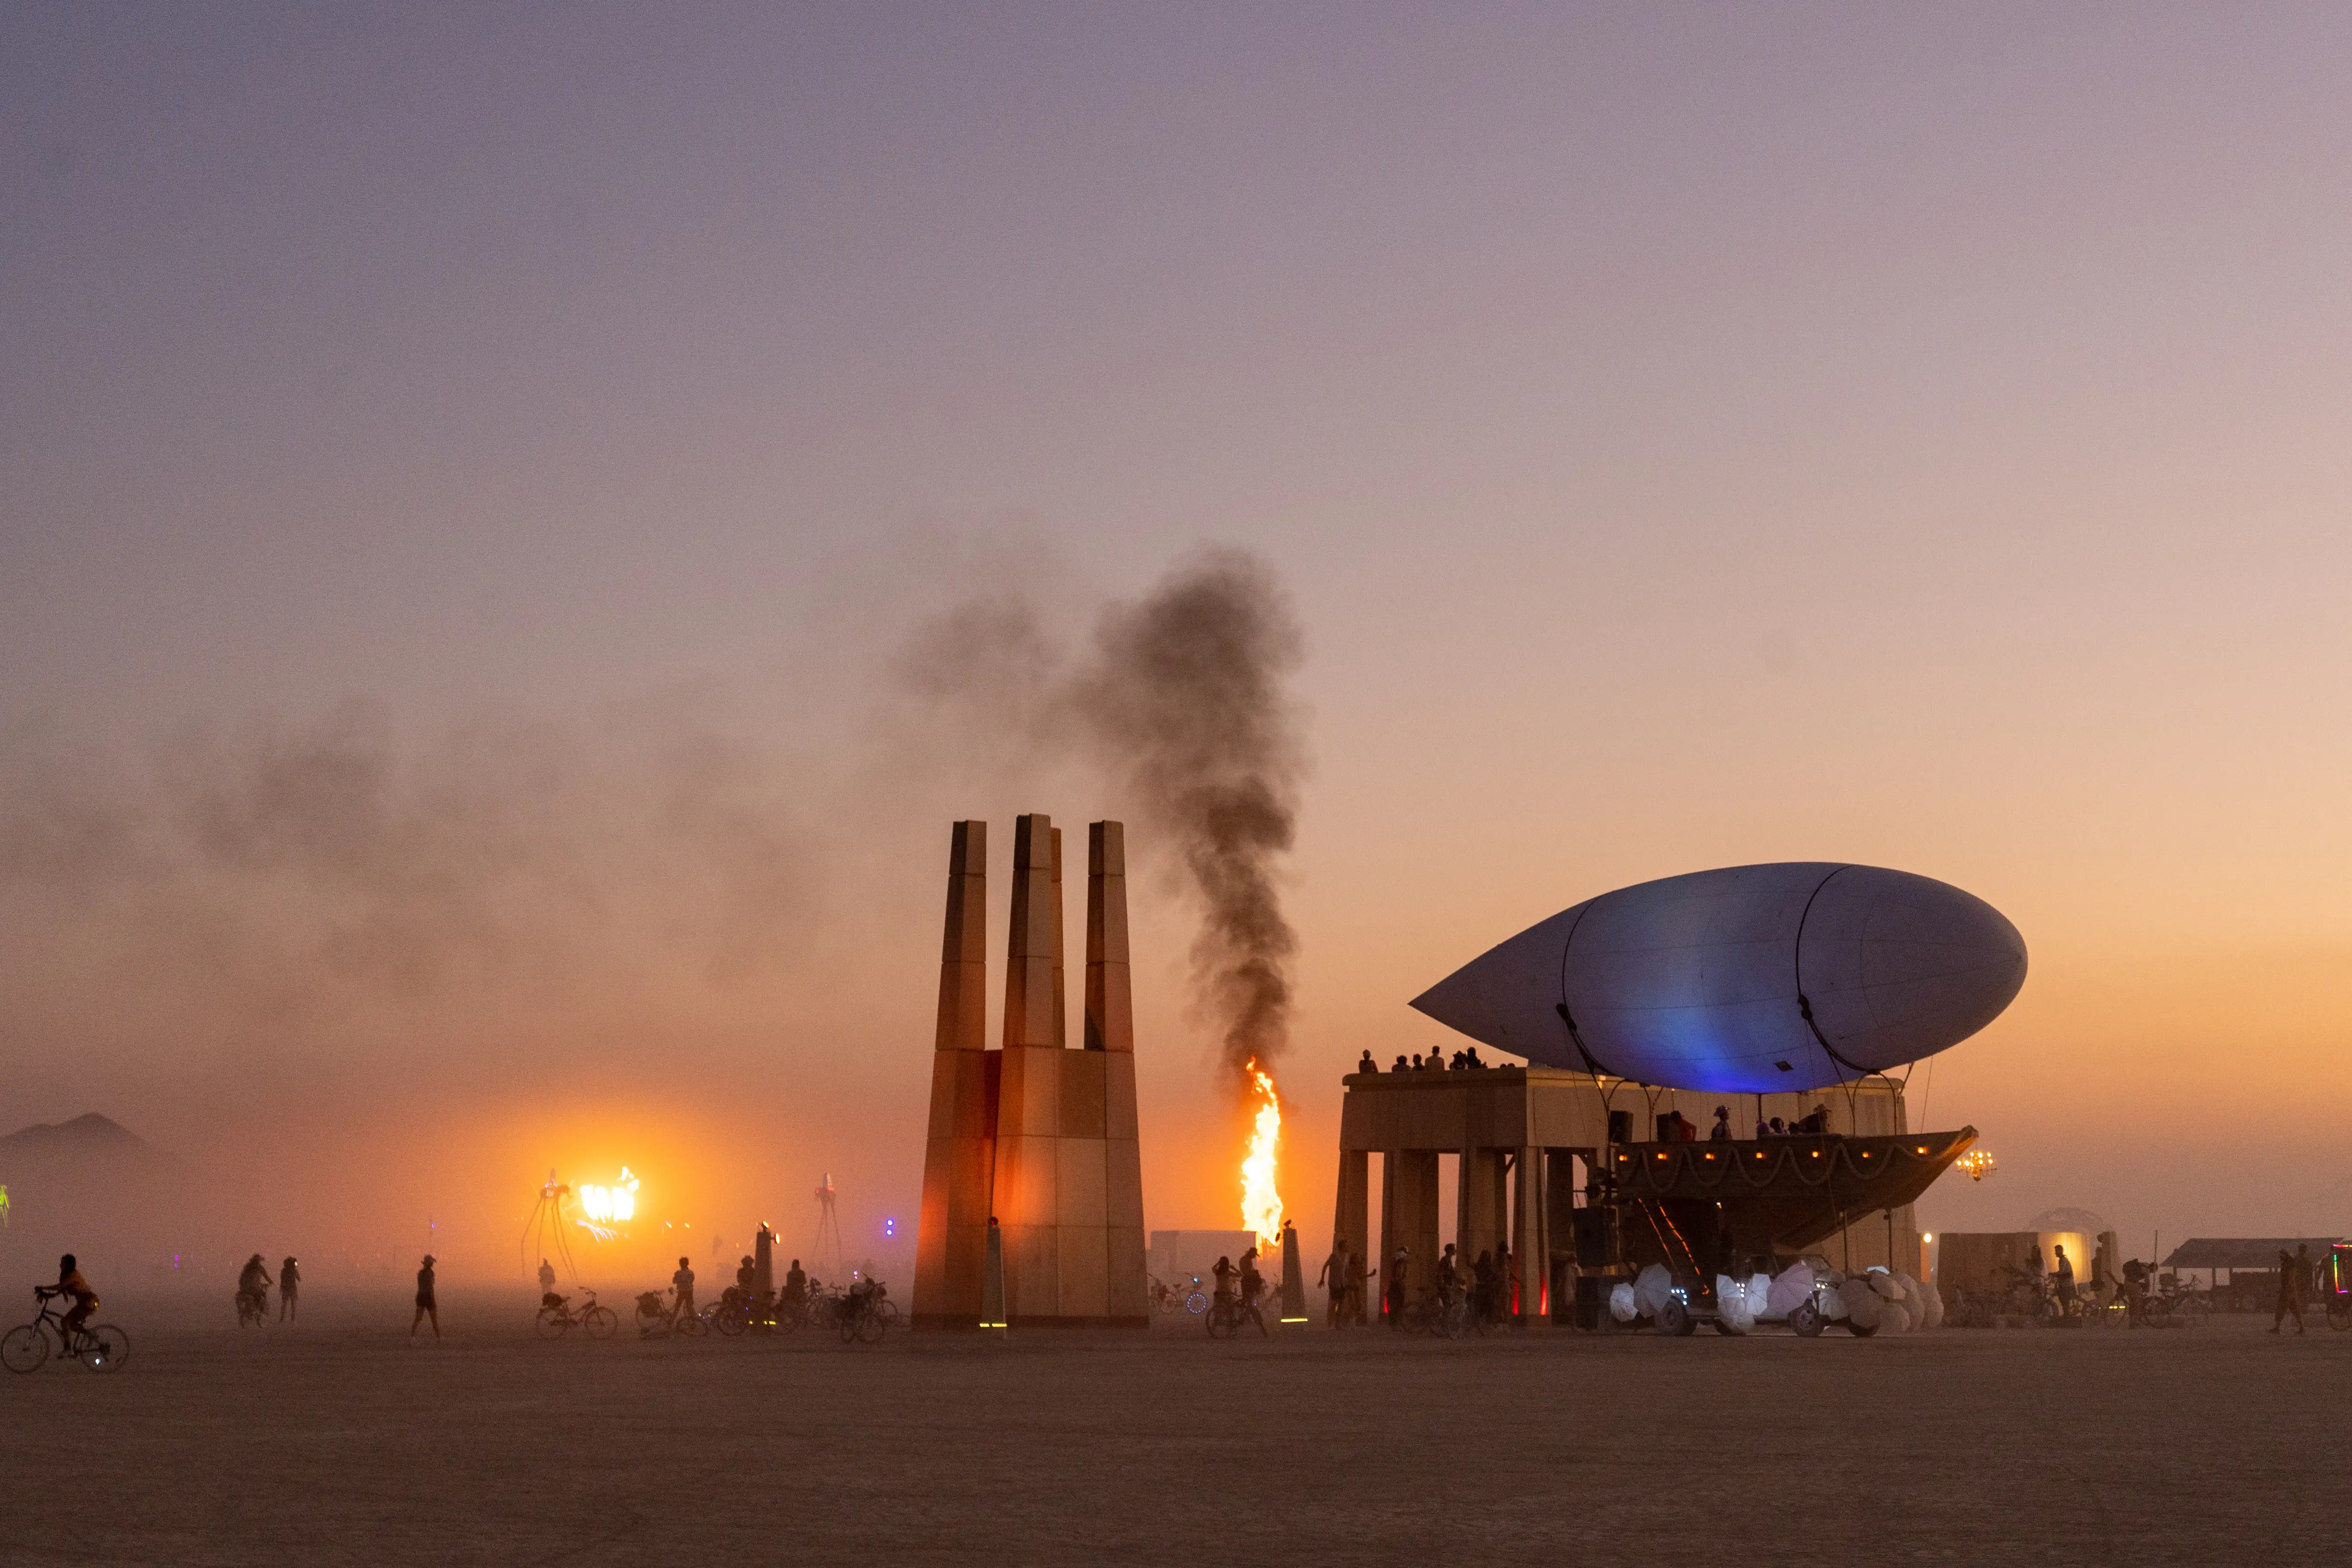 A sunset scene from the desert at Burning Man. There are two major fires in the background. In the foreground, two large buildings in the style of Afro-futurism; a tower about 40 feet high and a squat parthenon-shaped building about 25 feet high with a dozen people standing on the roof looking out at the fire. In the foreground, a mutant vehicle named Airpusher. The base of the vehicle looks like half of a sailing ship. Instead of sails, there is a large digible-shaped balloon. Bicycles and burners are seen throughout.